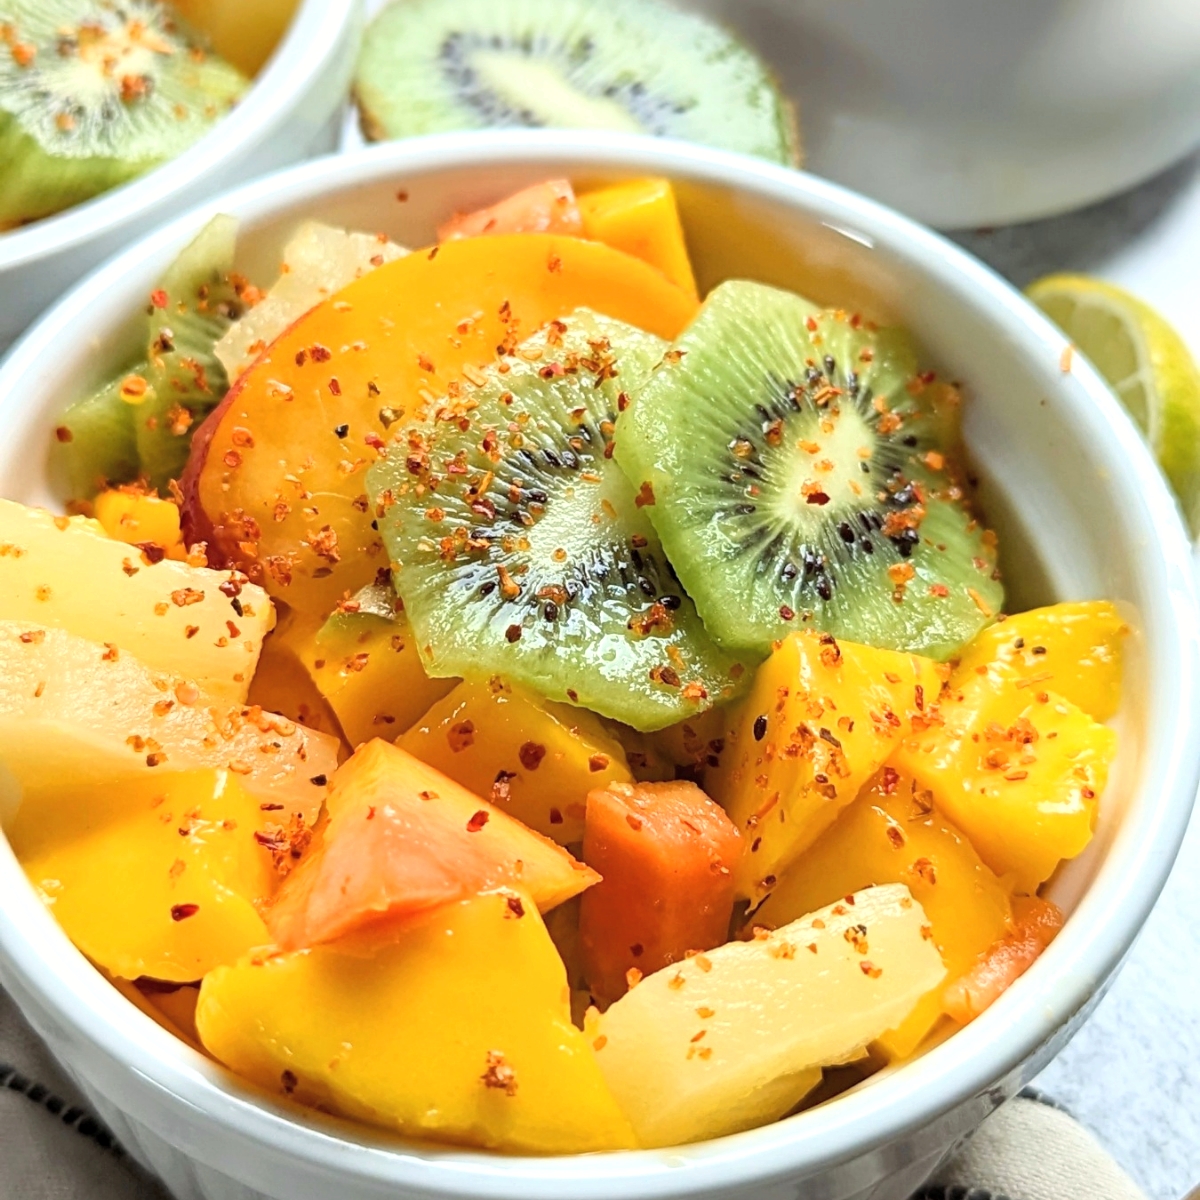 chili lime fruit with tajin recipe spicy fruit salad fruit salad seasoning or dressing with lime and spices